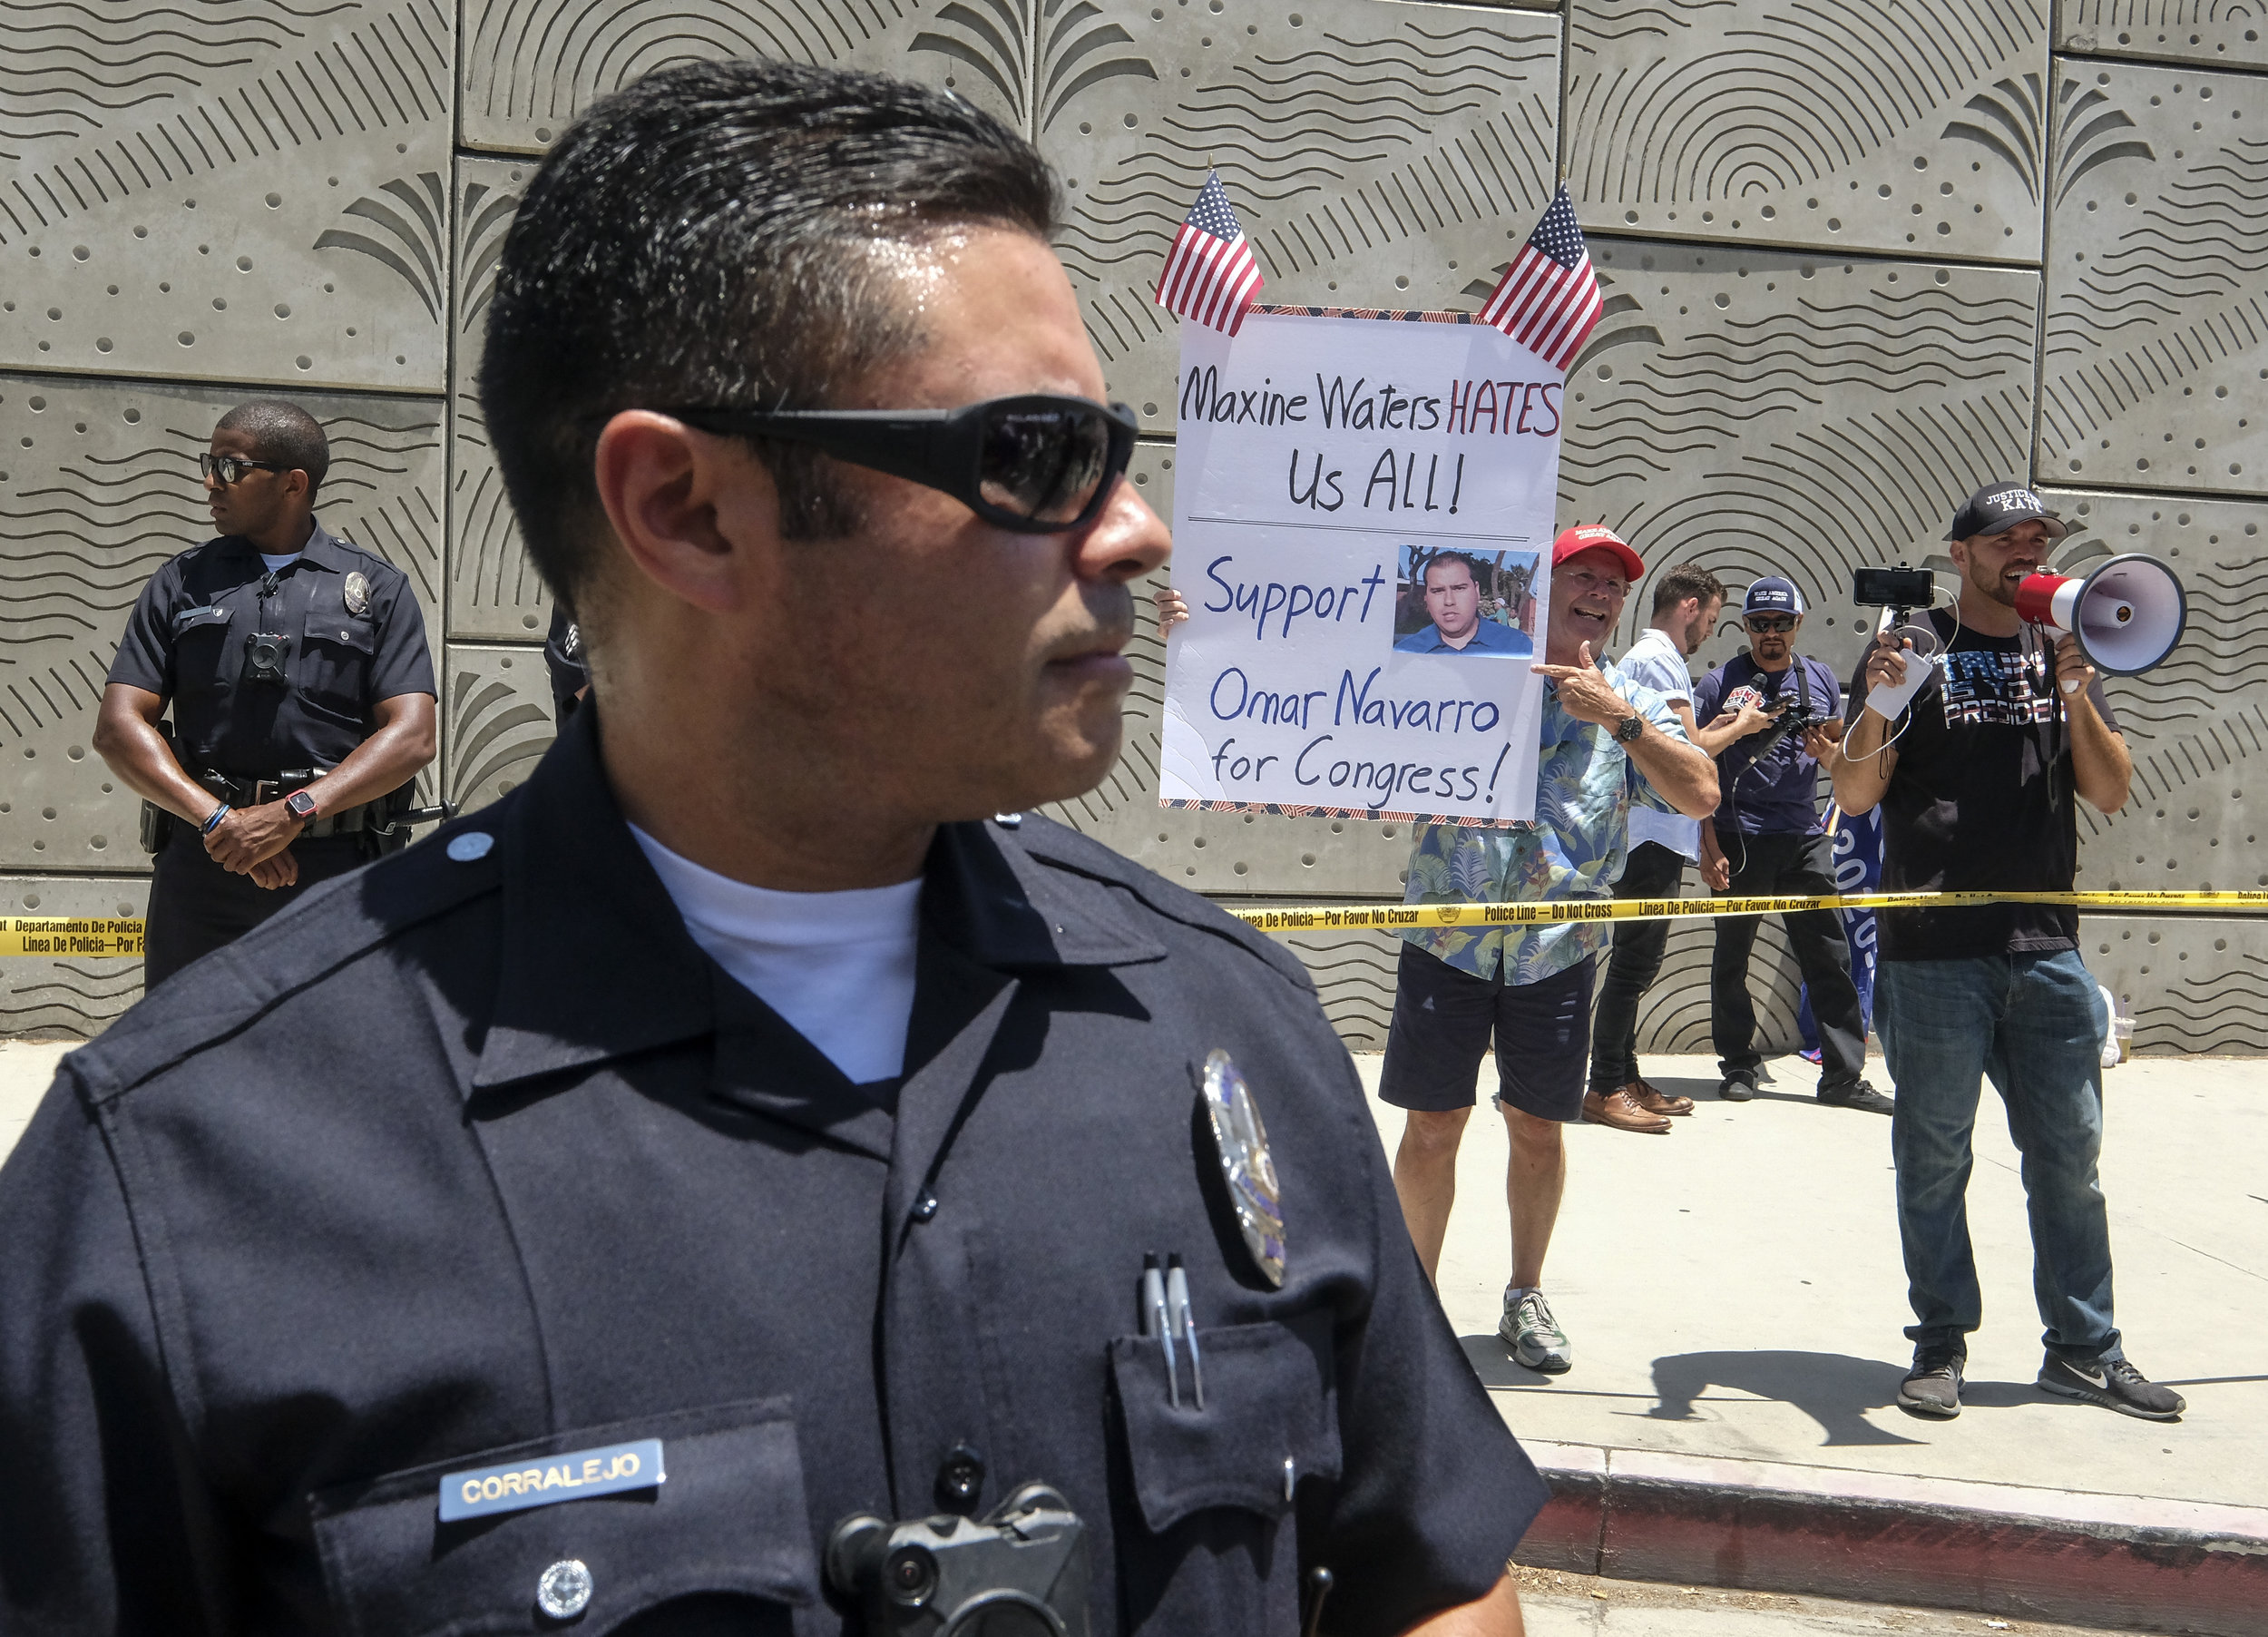  A police officer separates the Trump supporters, in the back, and the anti-Trump demonstrators during a march against the separation of immigrant families, in Los Angeles on June 30, 2018. It's one of 600-plus marches to be held across the country t